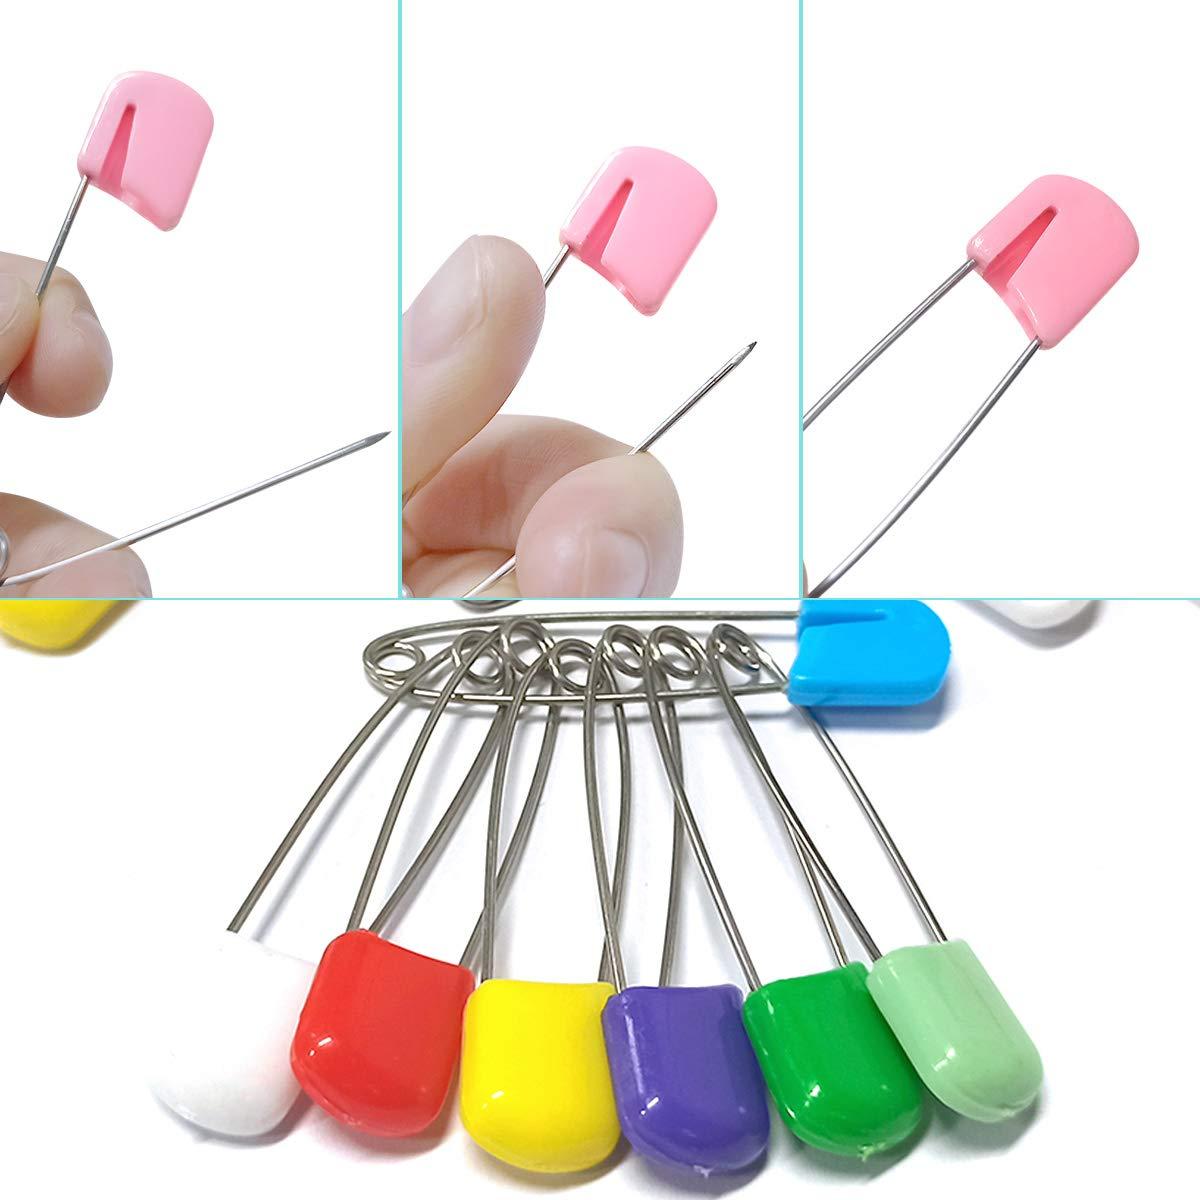 50 Pcs Diaper Pins, Plastic Head Safety Pin with Safe Locking Closures  (Colorful)